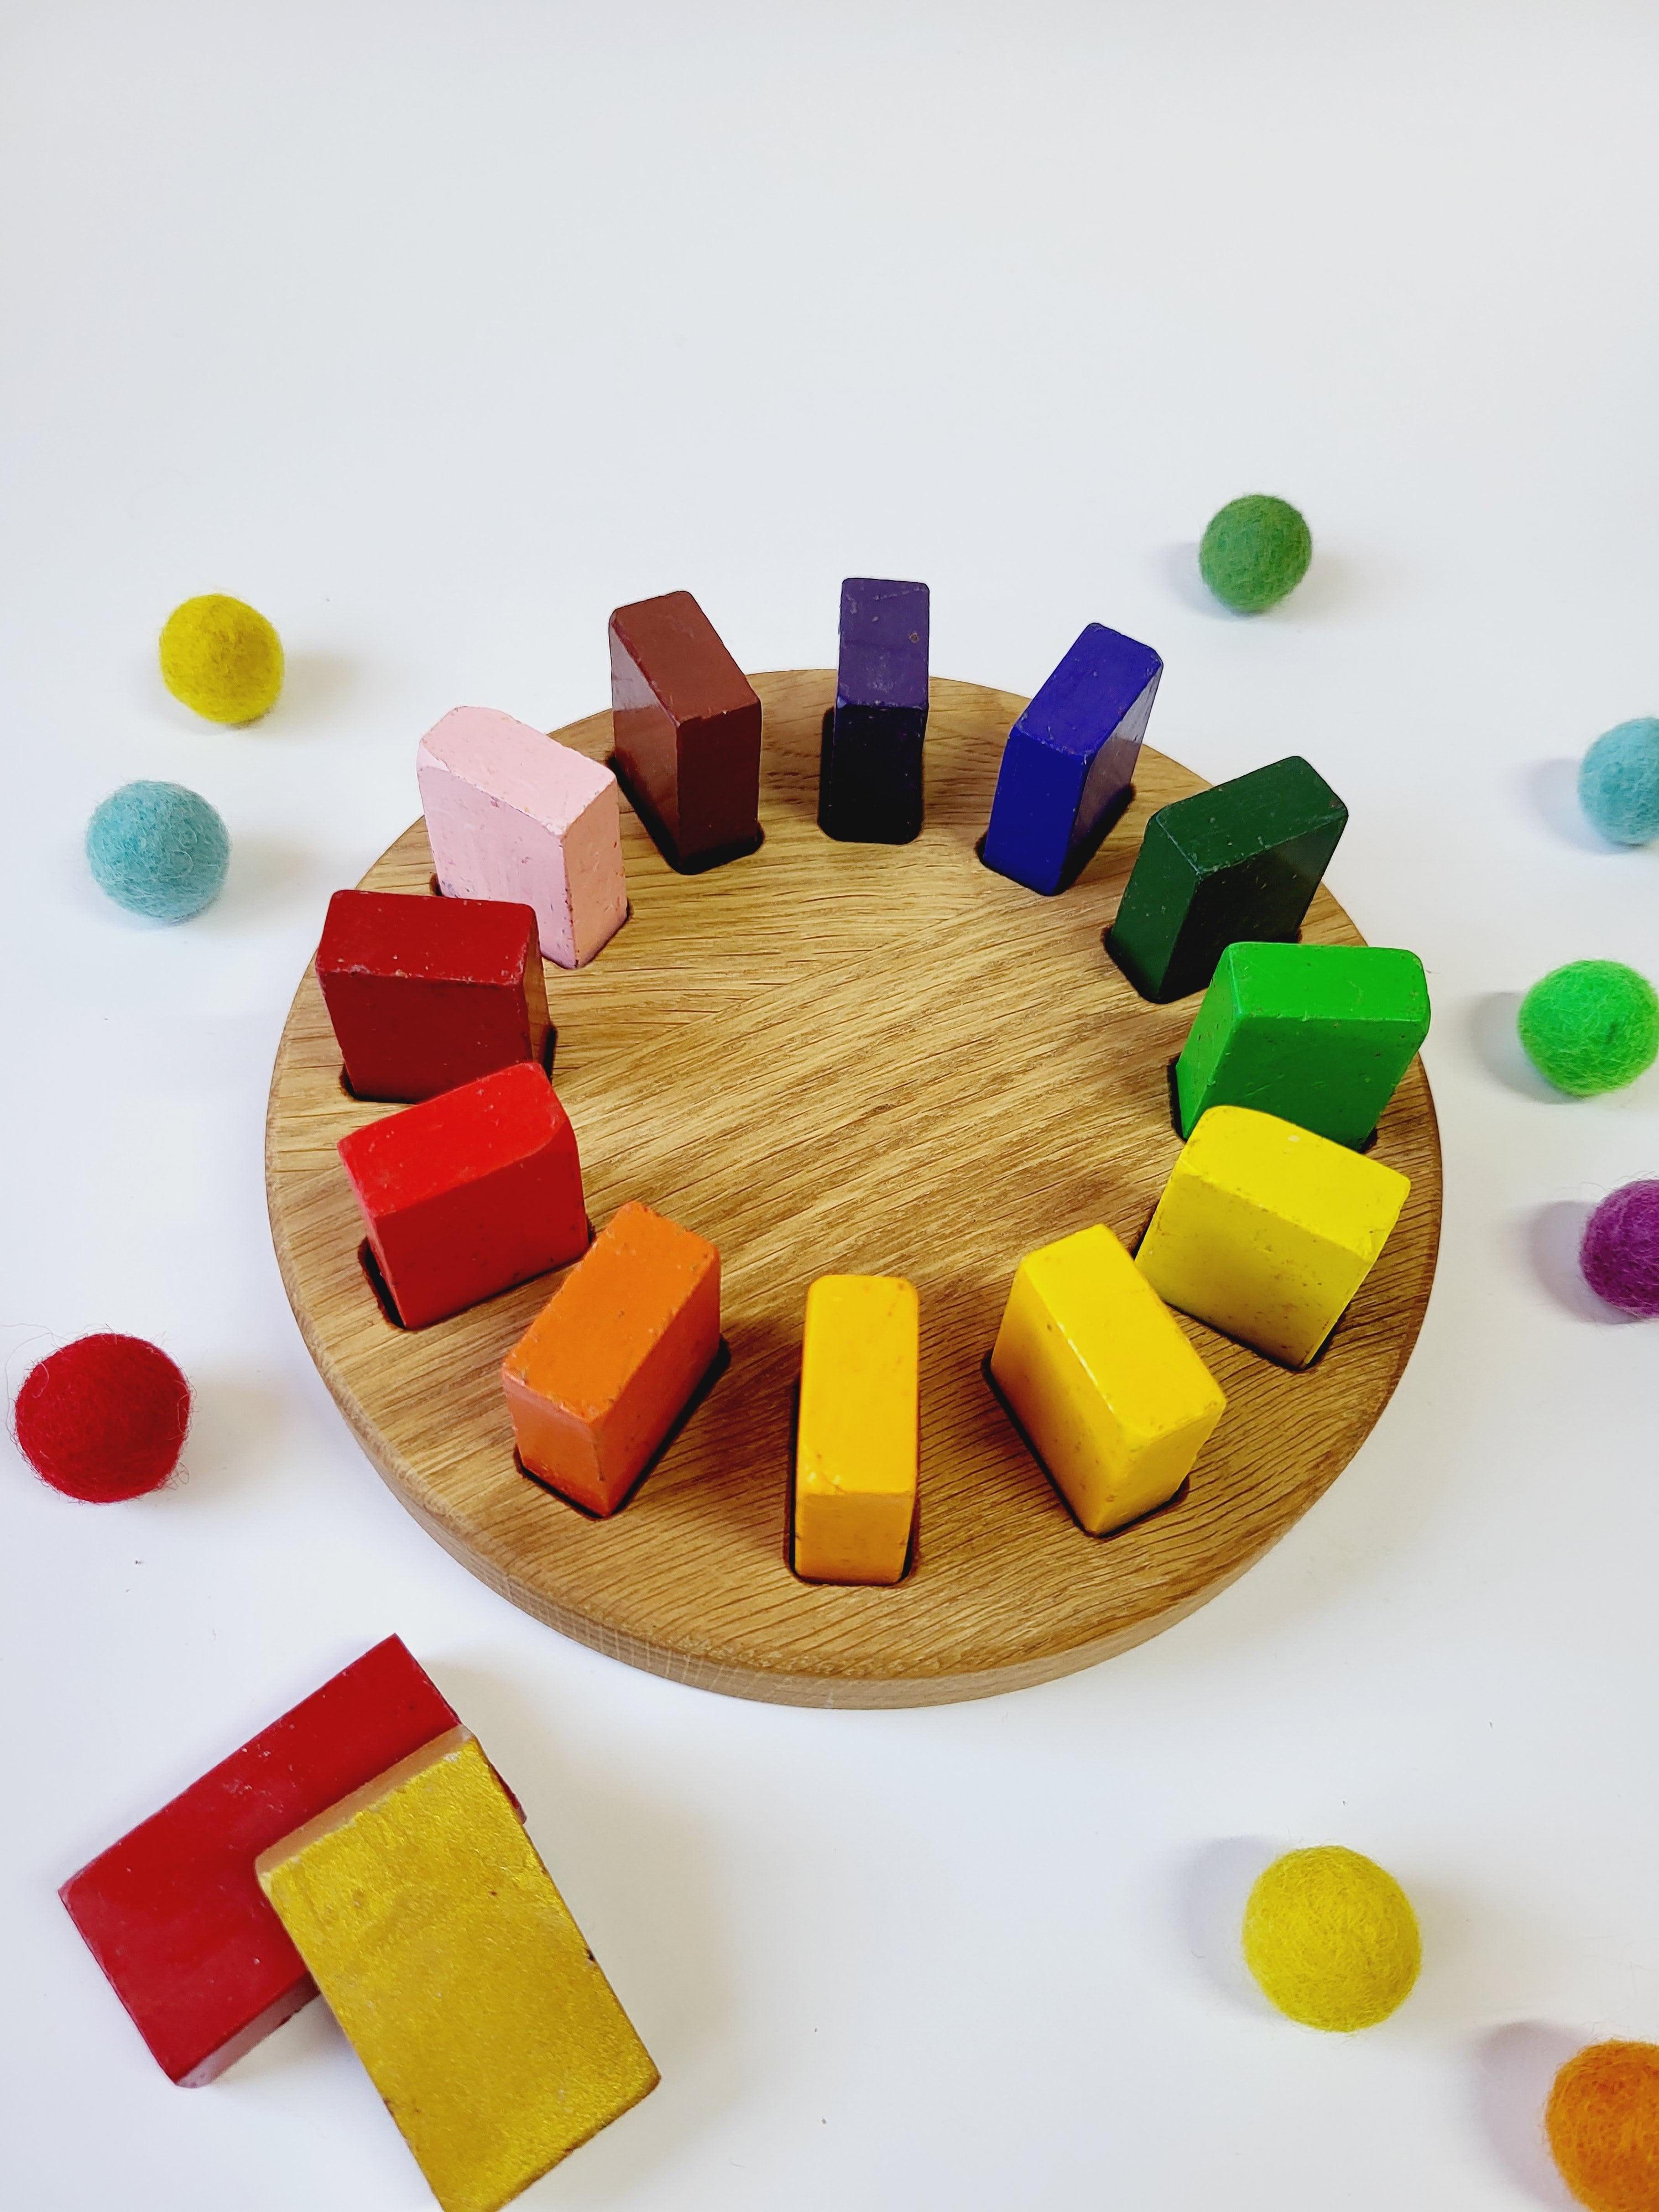 Round crayon holder for blocks Waldorf Stockmar painting, artworks, halloween gift for kids, desk organization, art supply, wooden holder without crayons, playroom gift, art and craft gift, art education